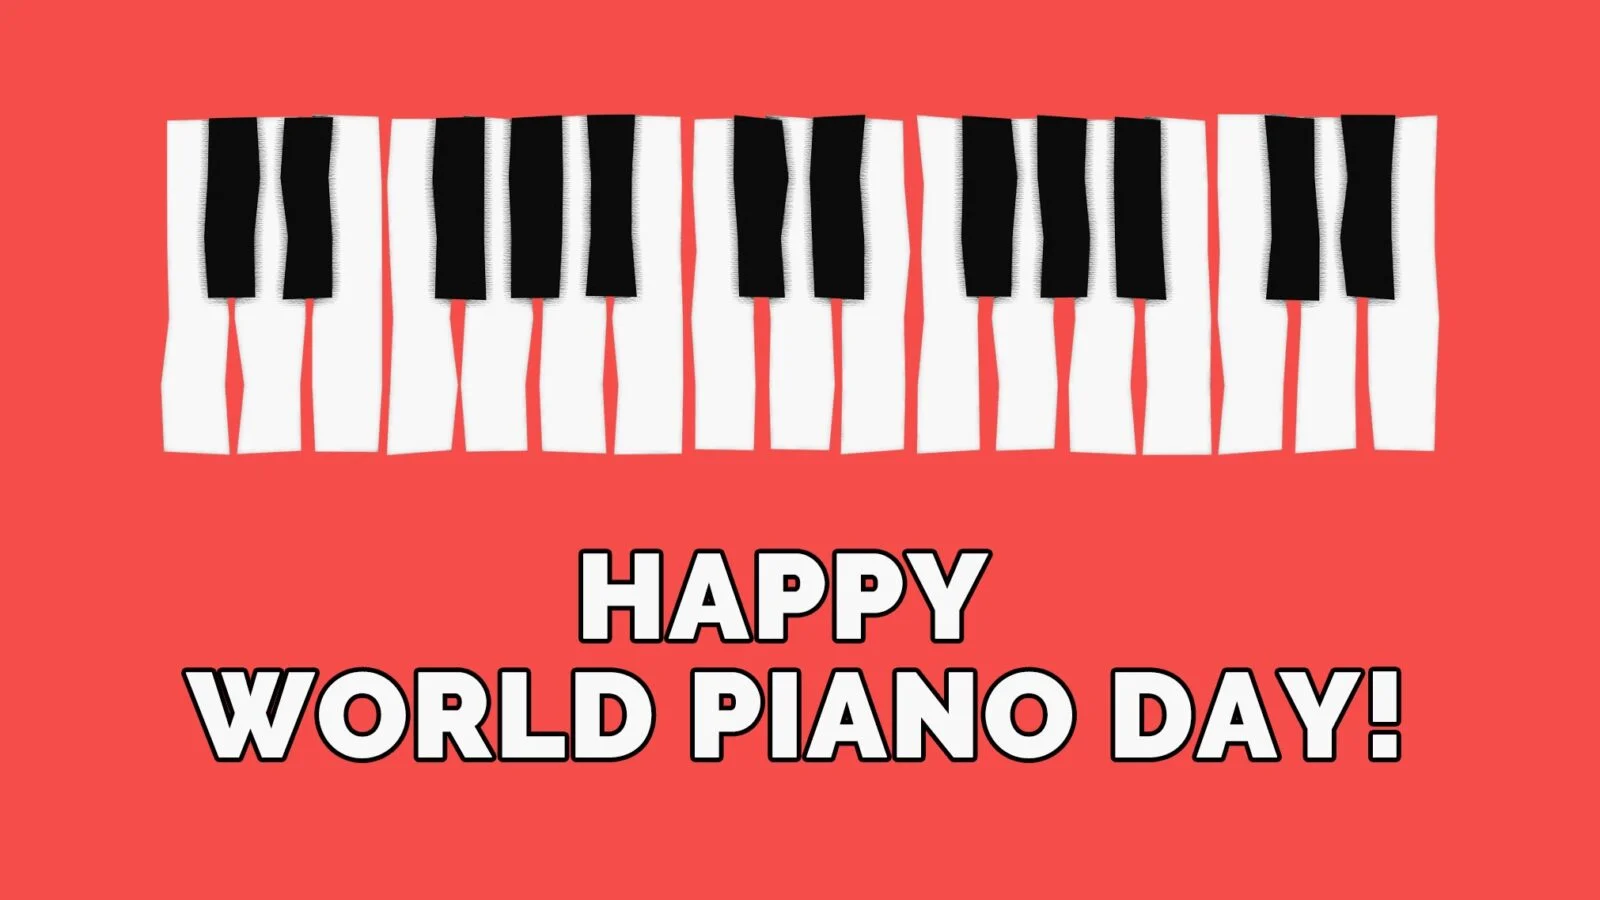 World Piano Day Celebrating The Beauty And History Of The Piano